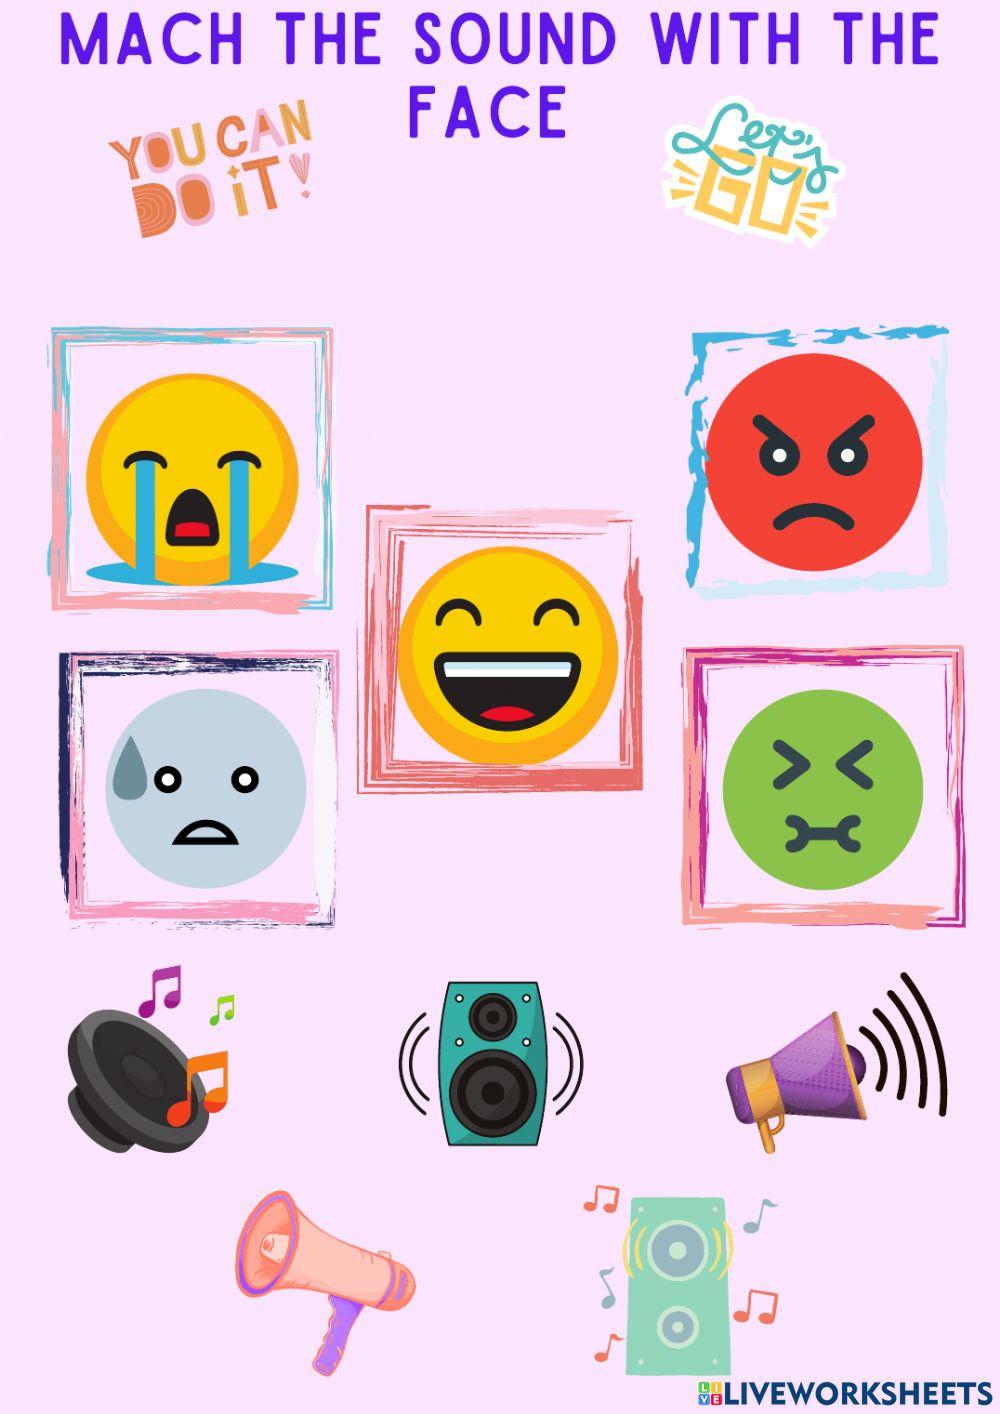 Guess the favorite speaker of emotions